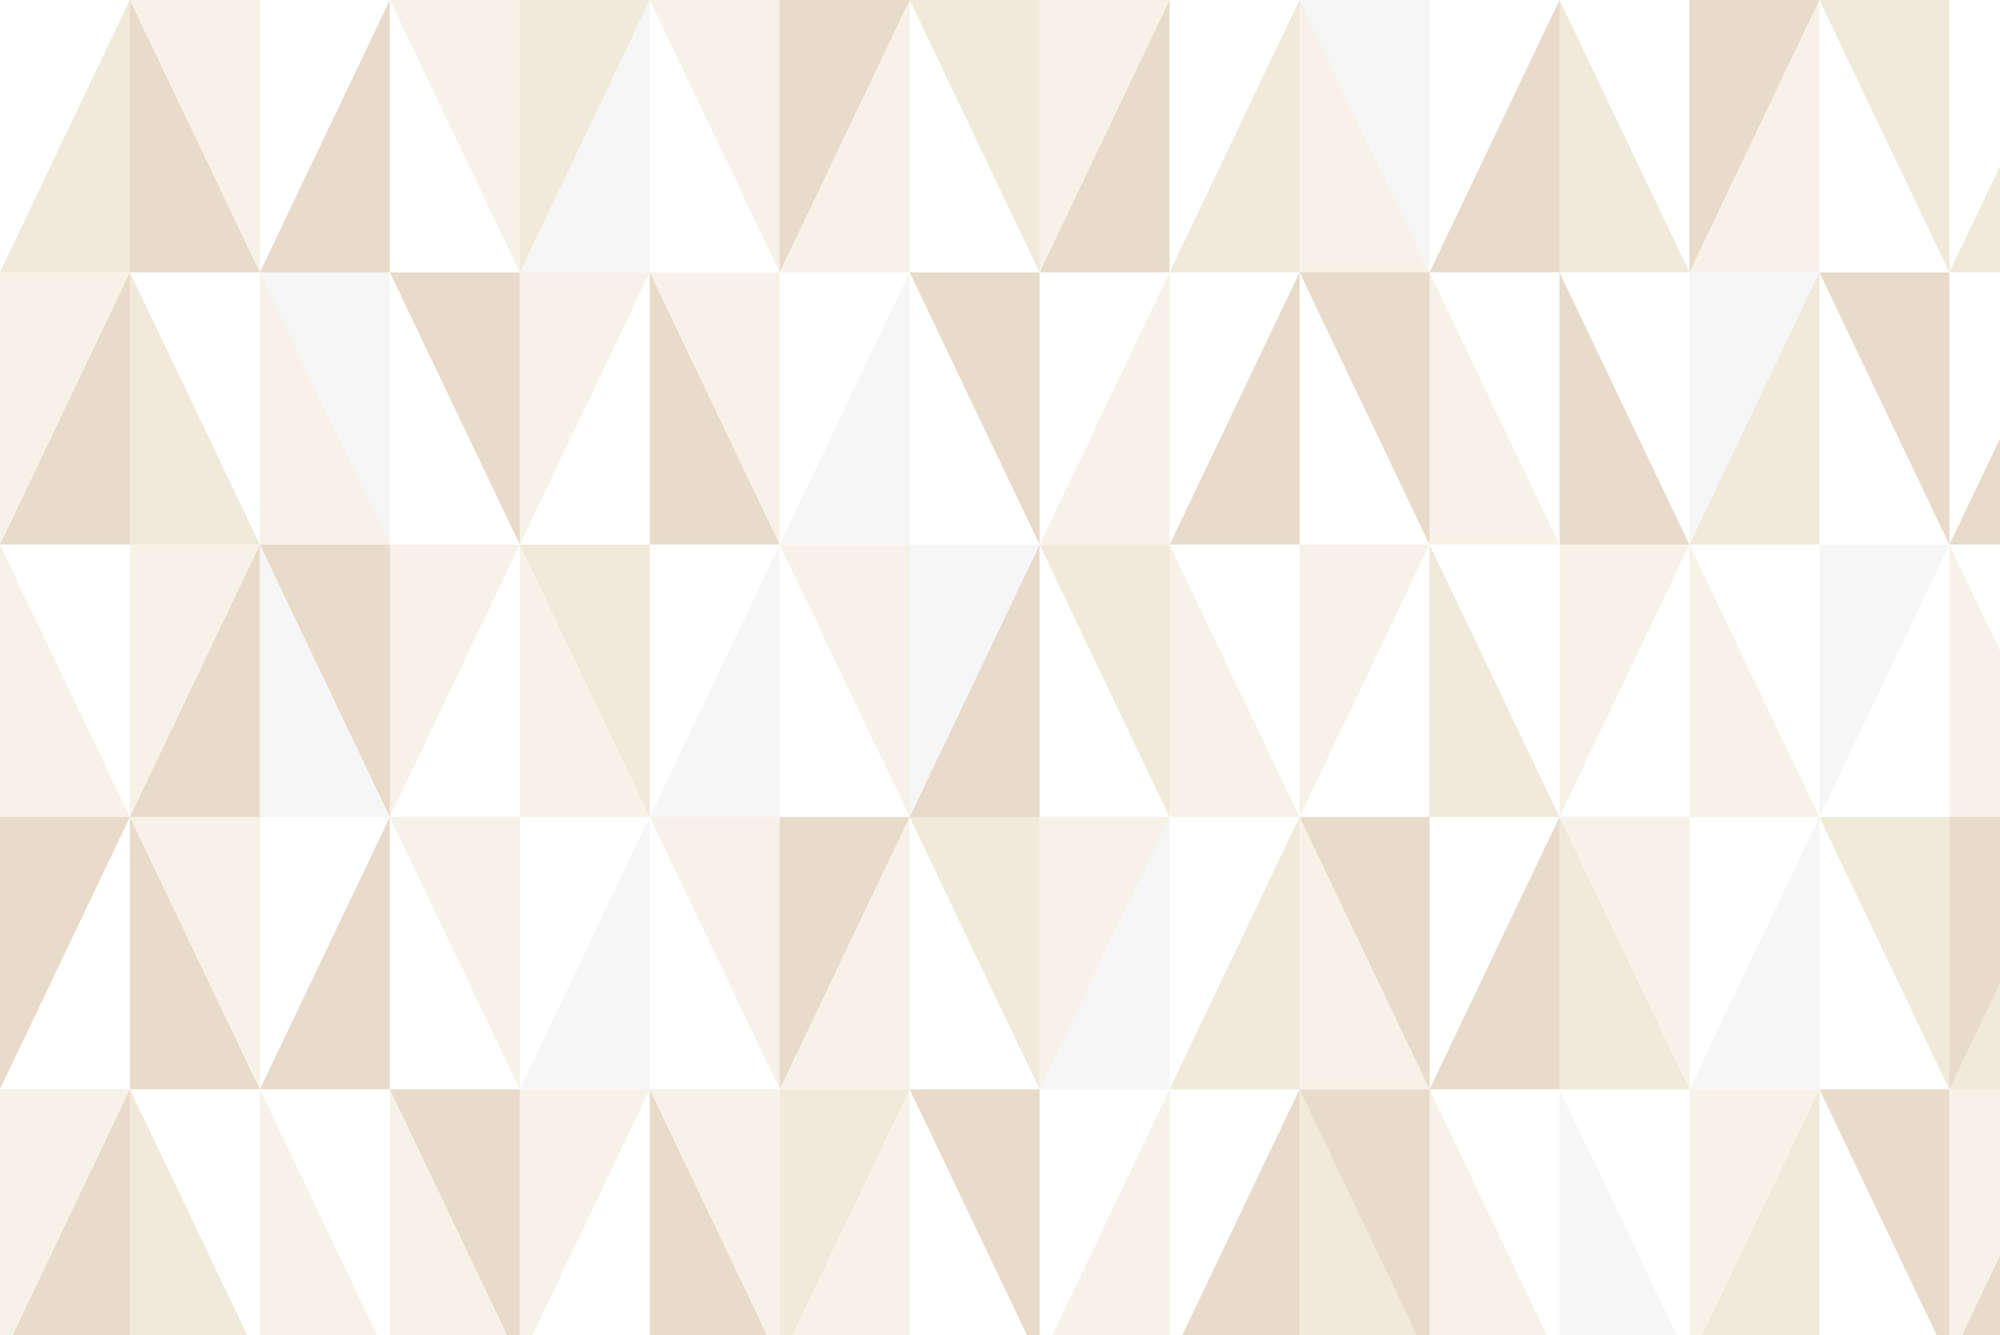             Design mural with small triangles beige on premium smooth fleece
        